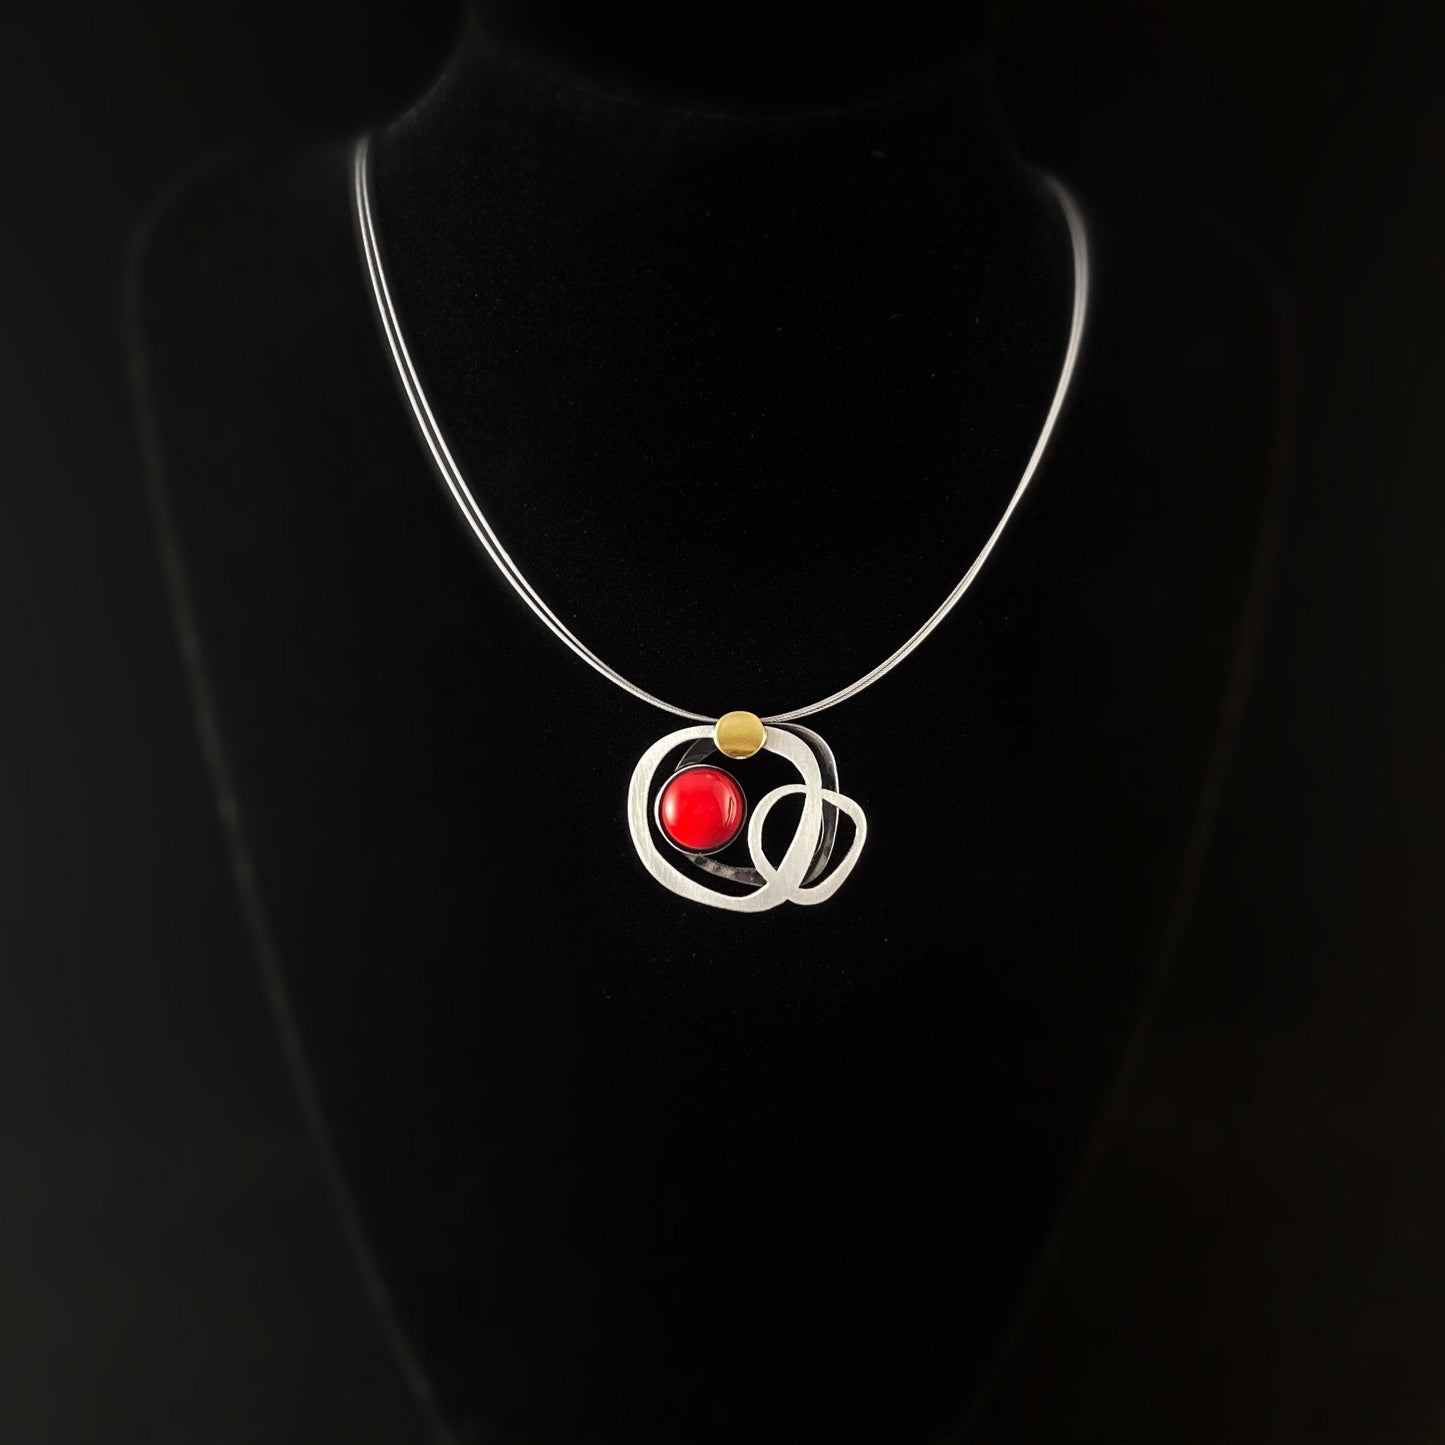 Lightweight Handmade Geometric Aluminum Necklace, Silver and Red Circles